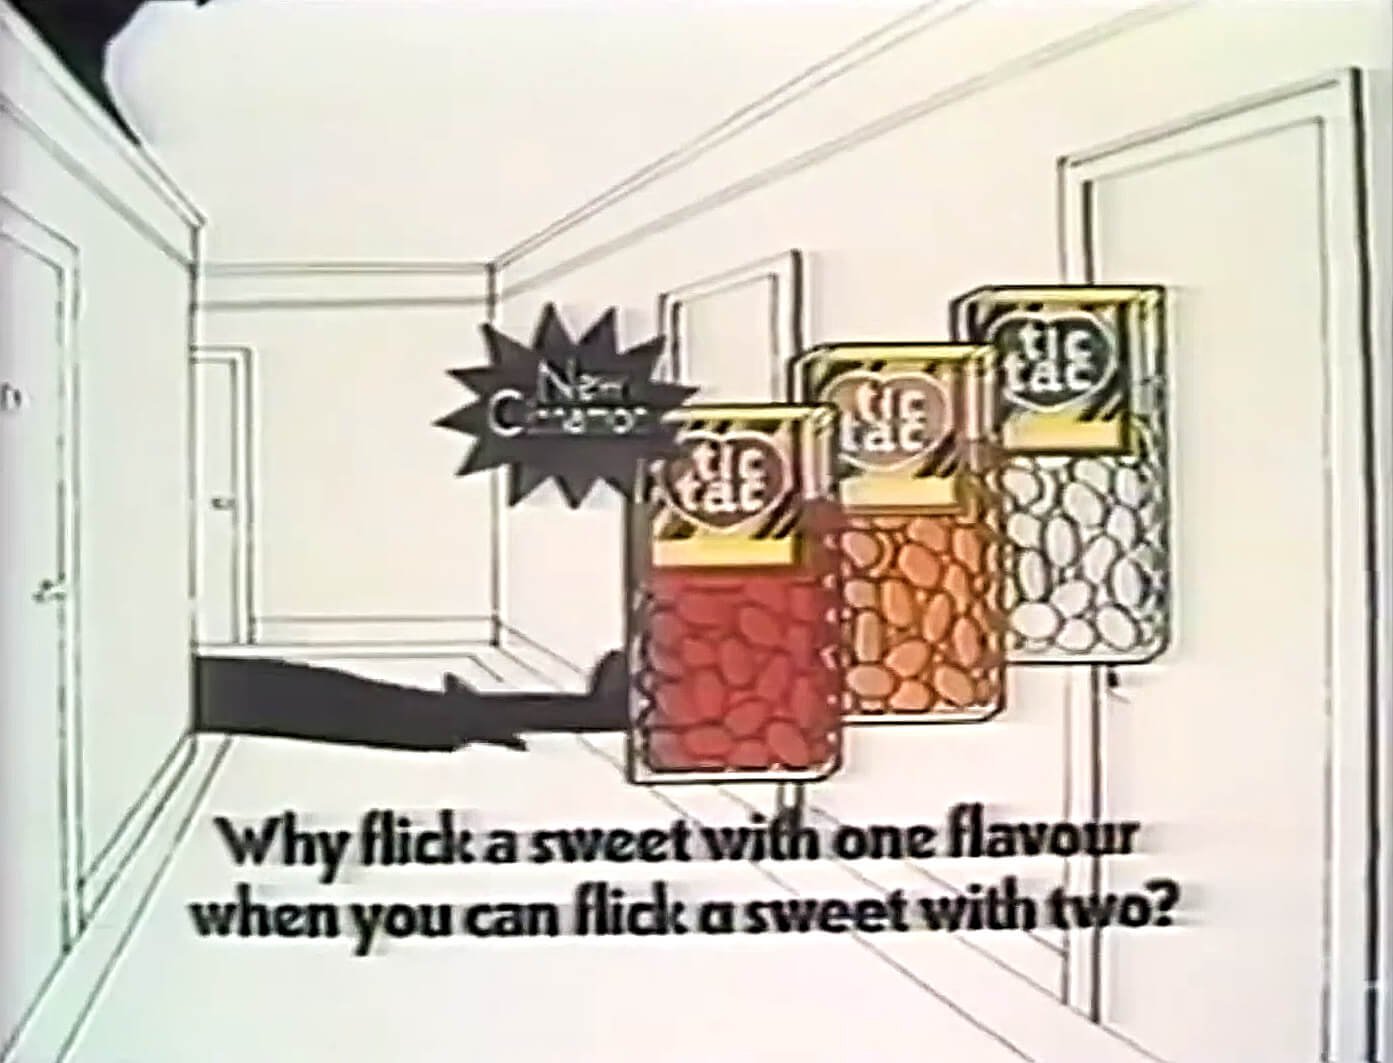 Tic Tac "flick" advert from 1975 showing new Cinnamon flavour